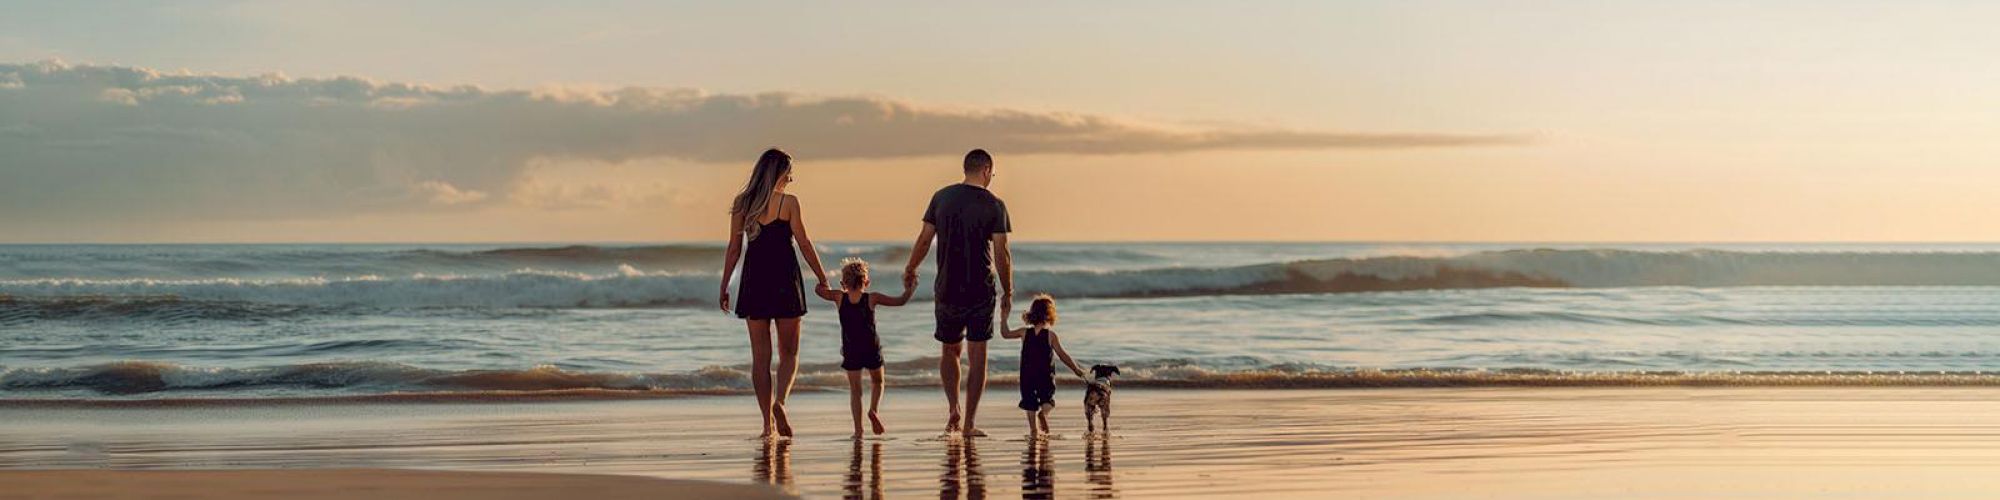 A family of four is walking hand-in-hand on a beach, heading toward the sea during sunset with their reflections in the wet sand.